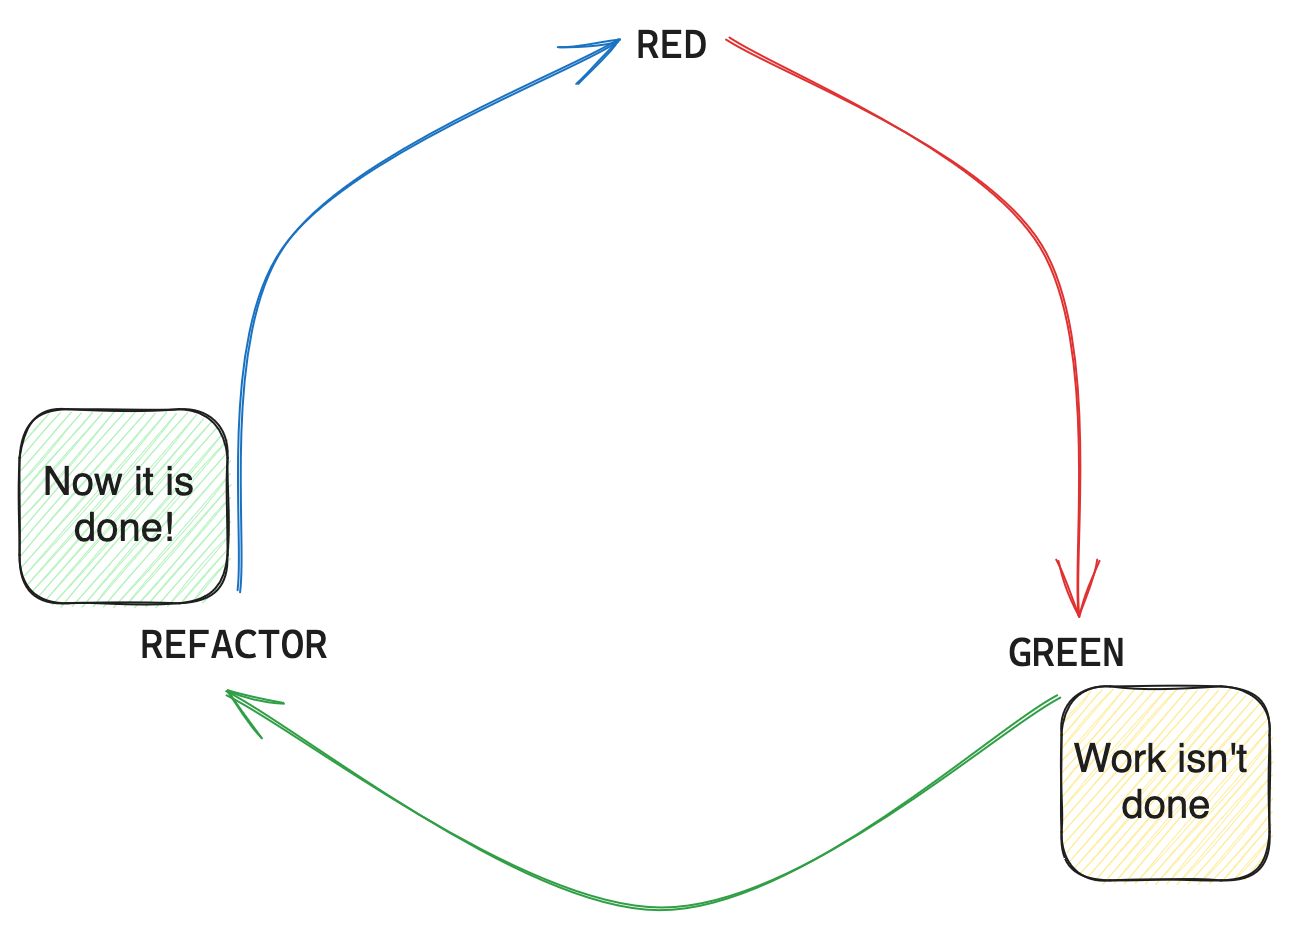 Red points to green. Work isn't done. Green points to refactor. Now work is done. Refactor points back to red.